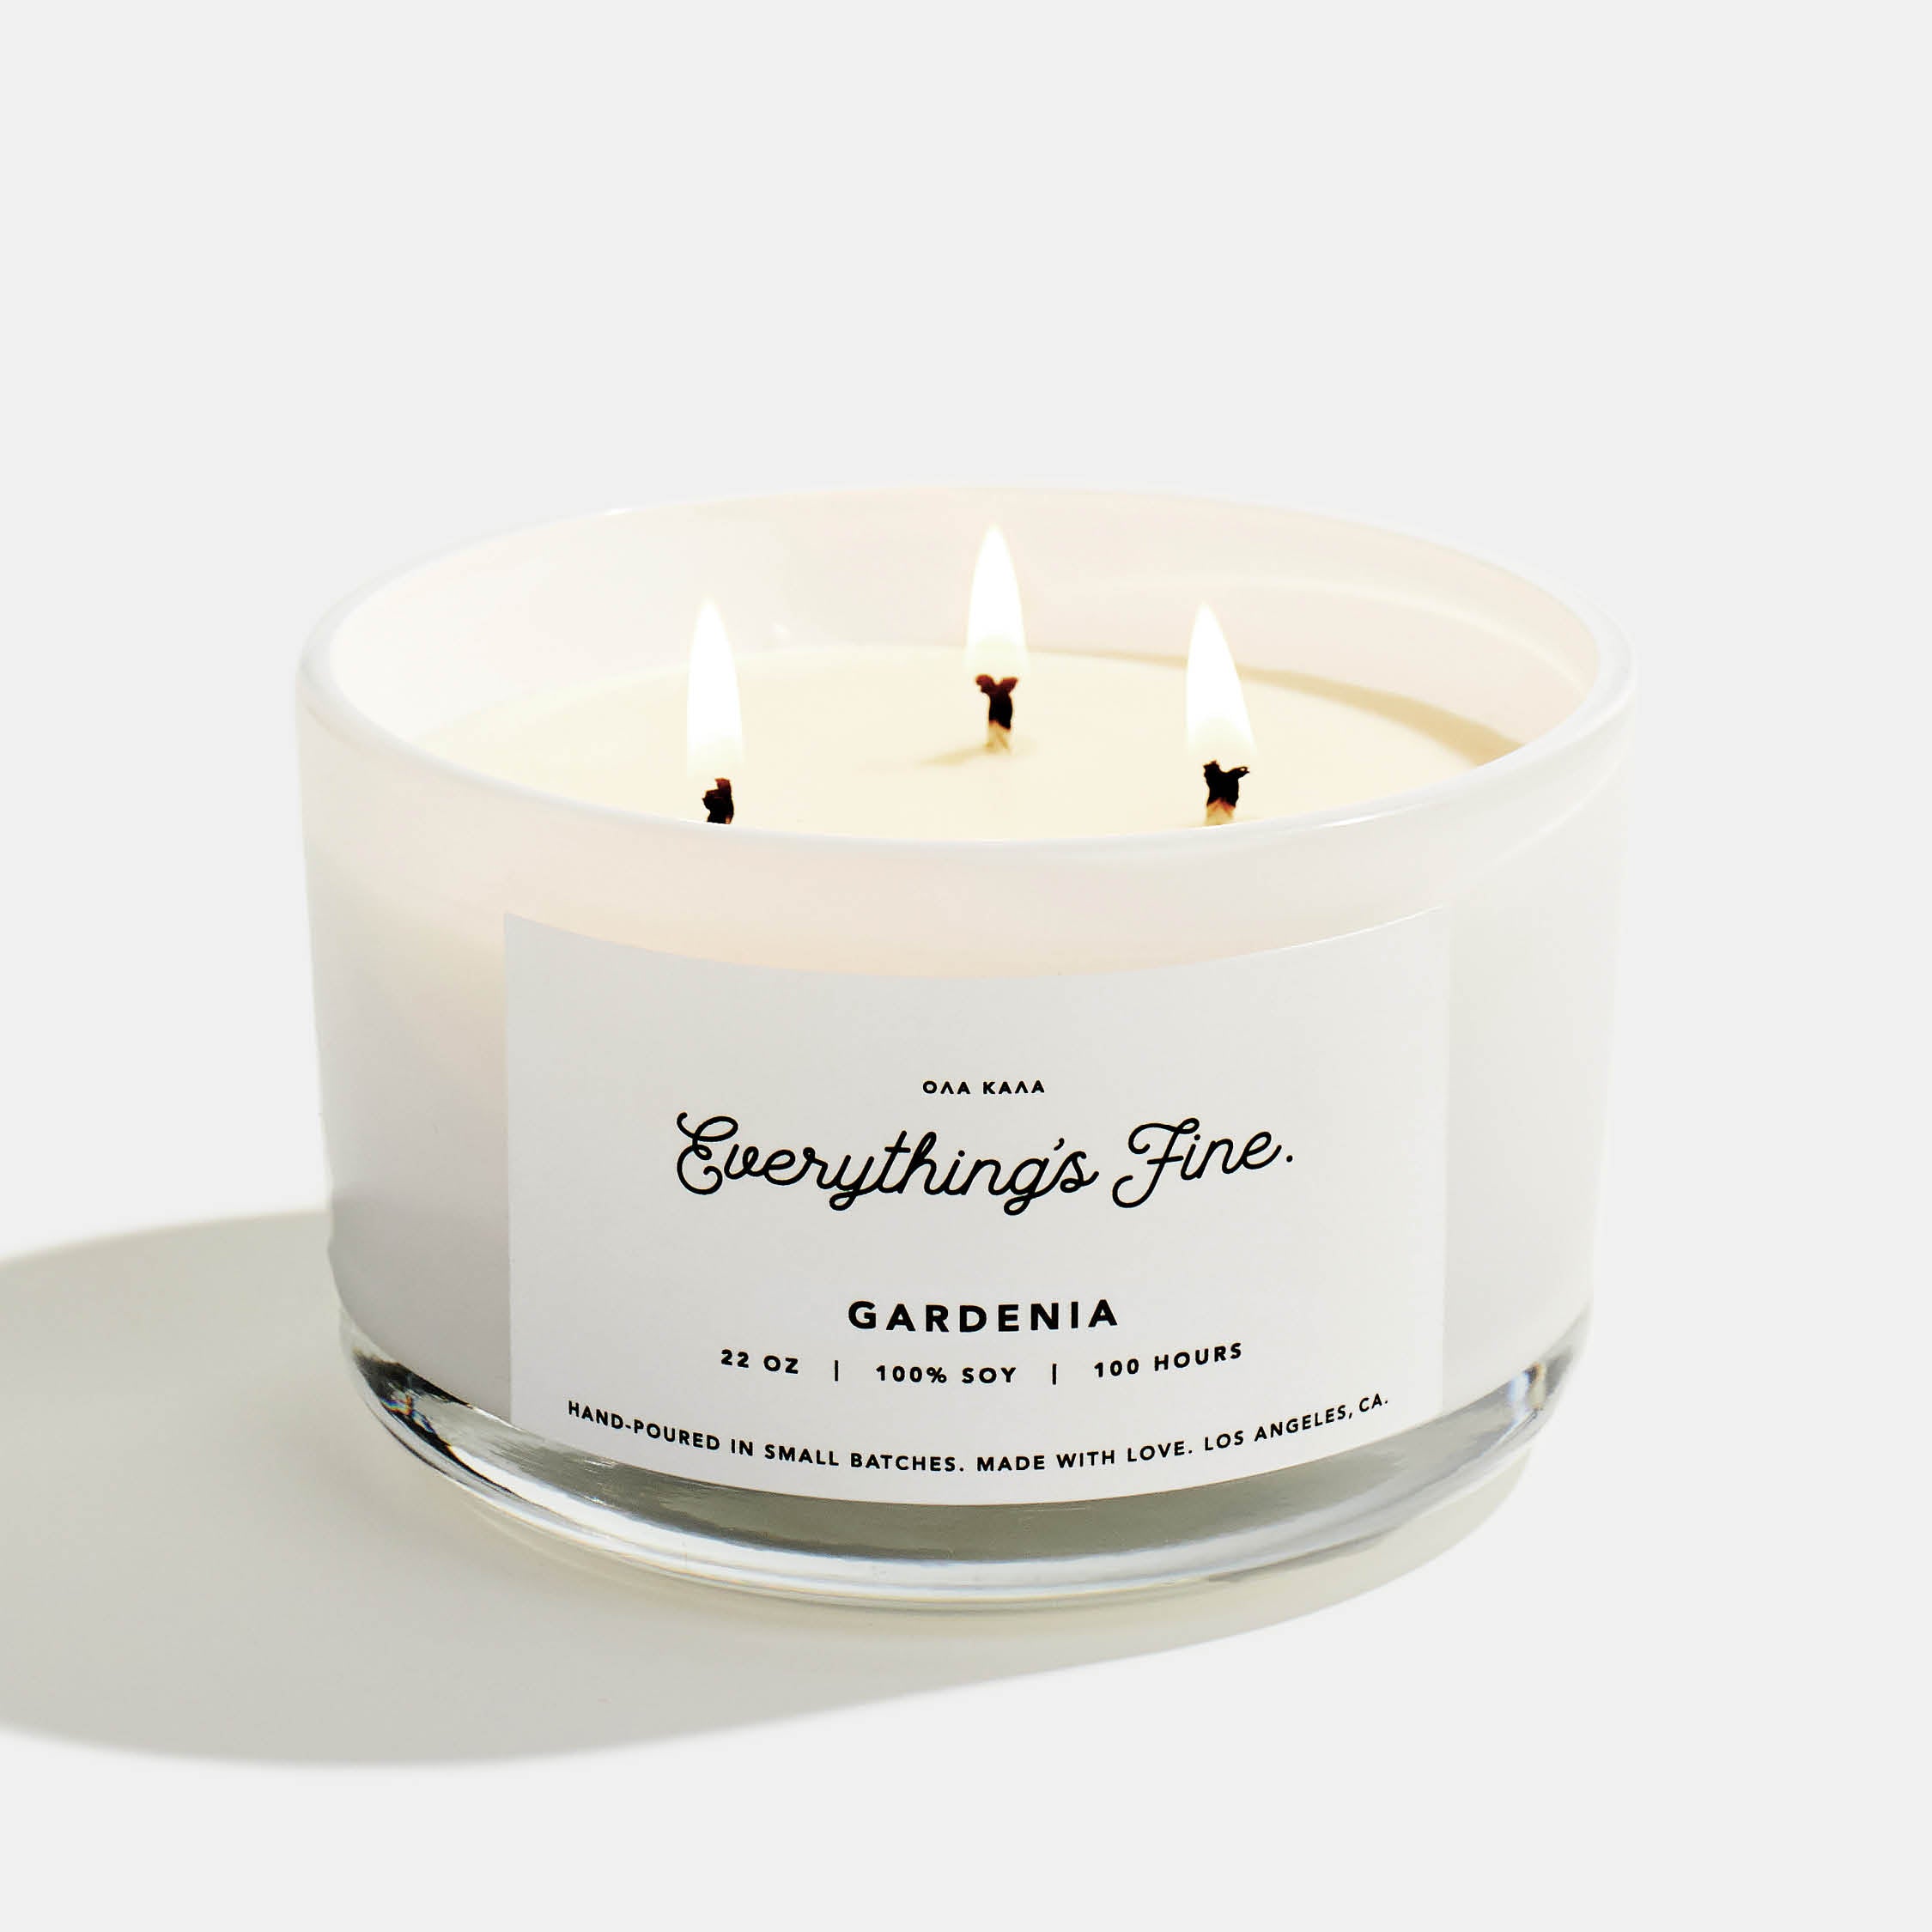 100% soy wax, hand-poured in ultra small batches in Los Angeles, CA. Made with a lead-free cotton wick and premium fragrance and essential oils for a clean burn. gardenia floral bouquet flowers spring